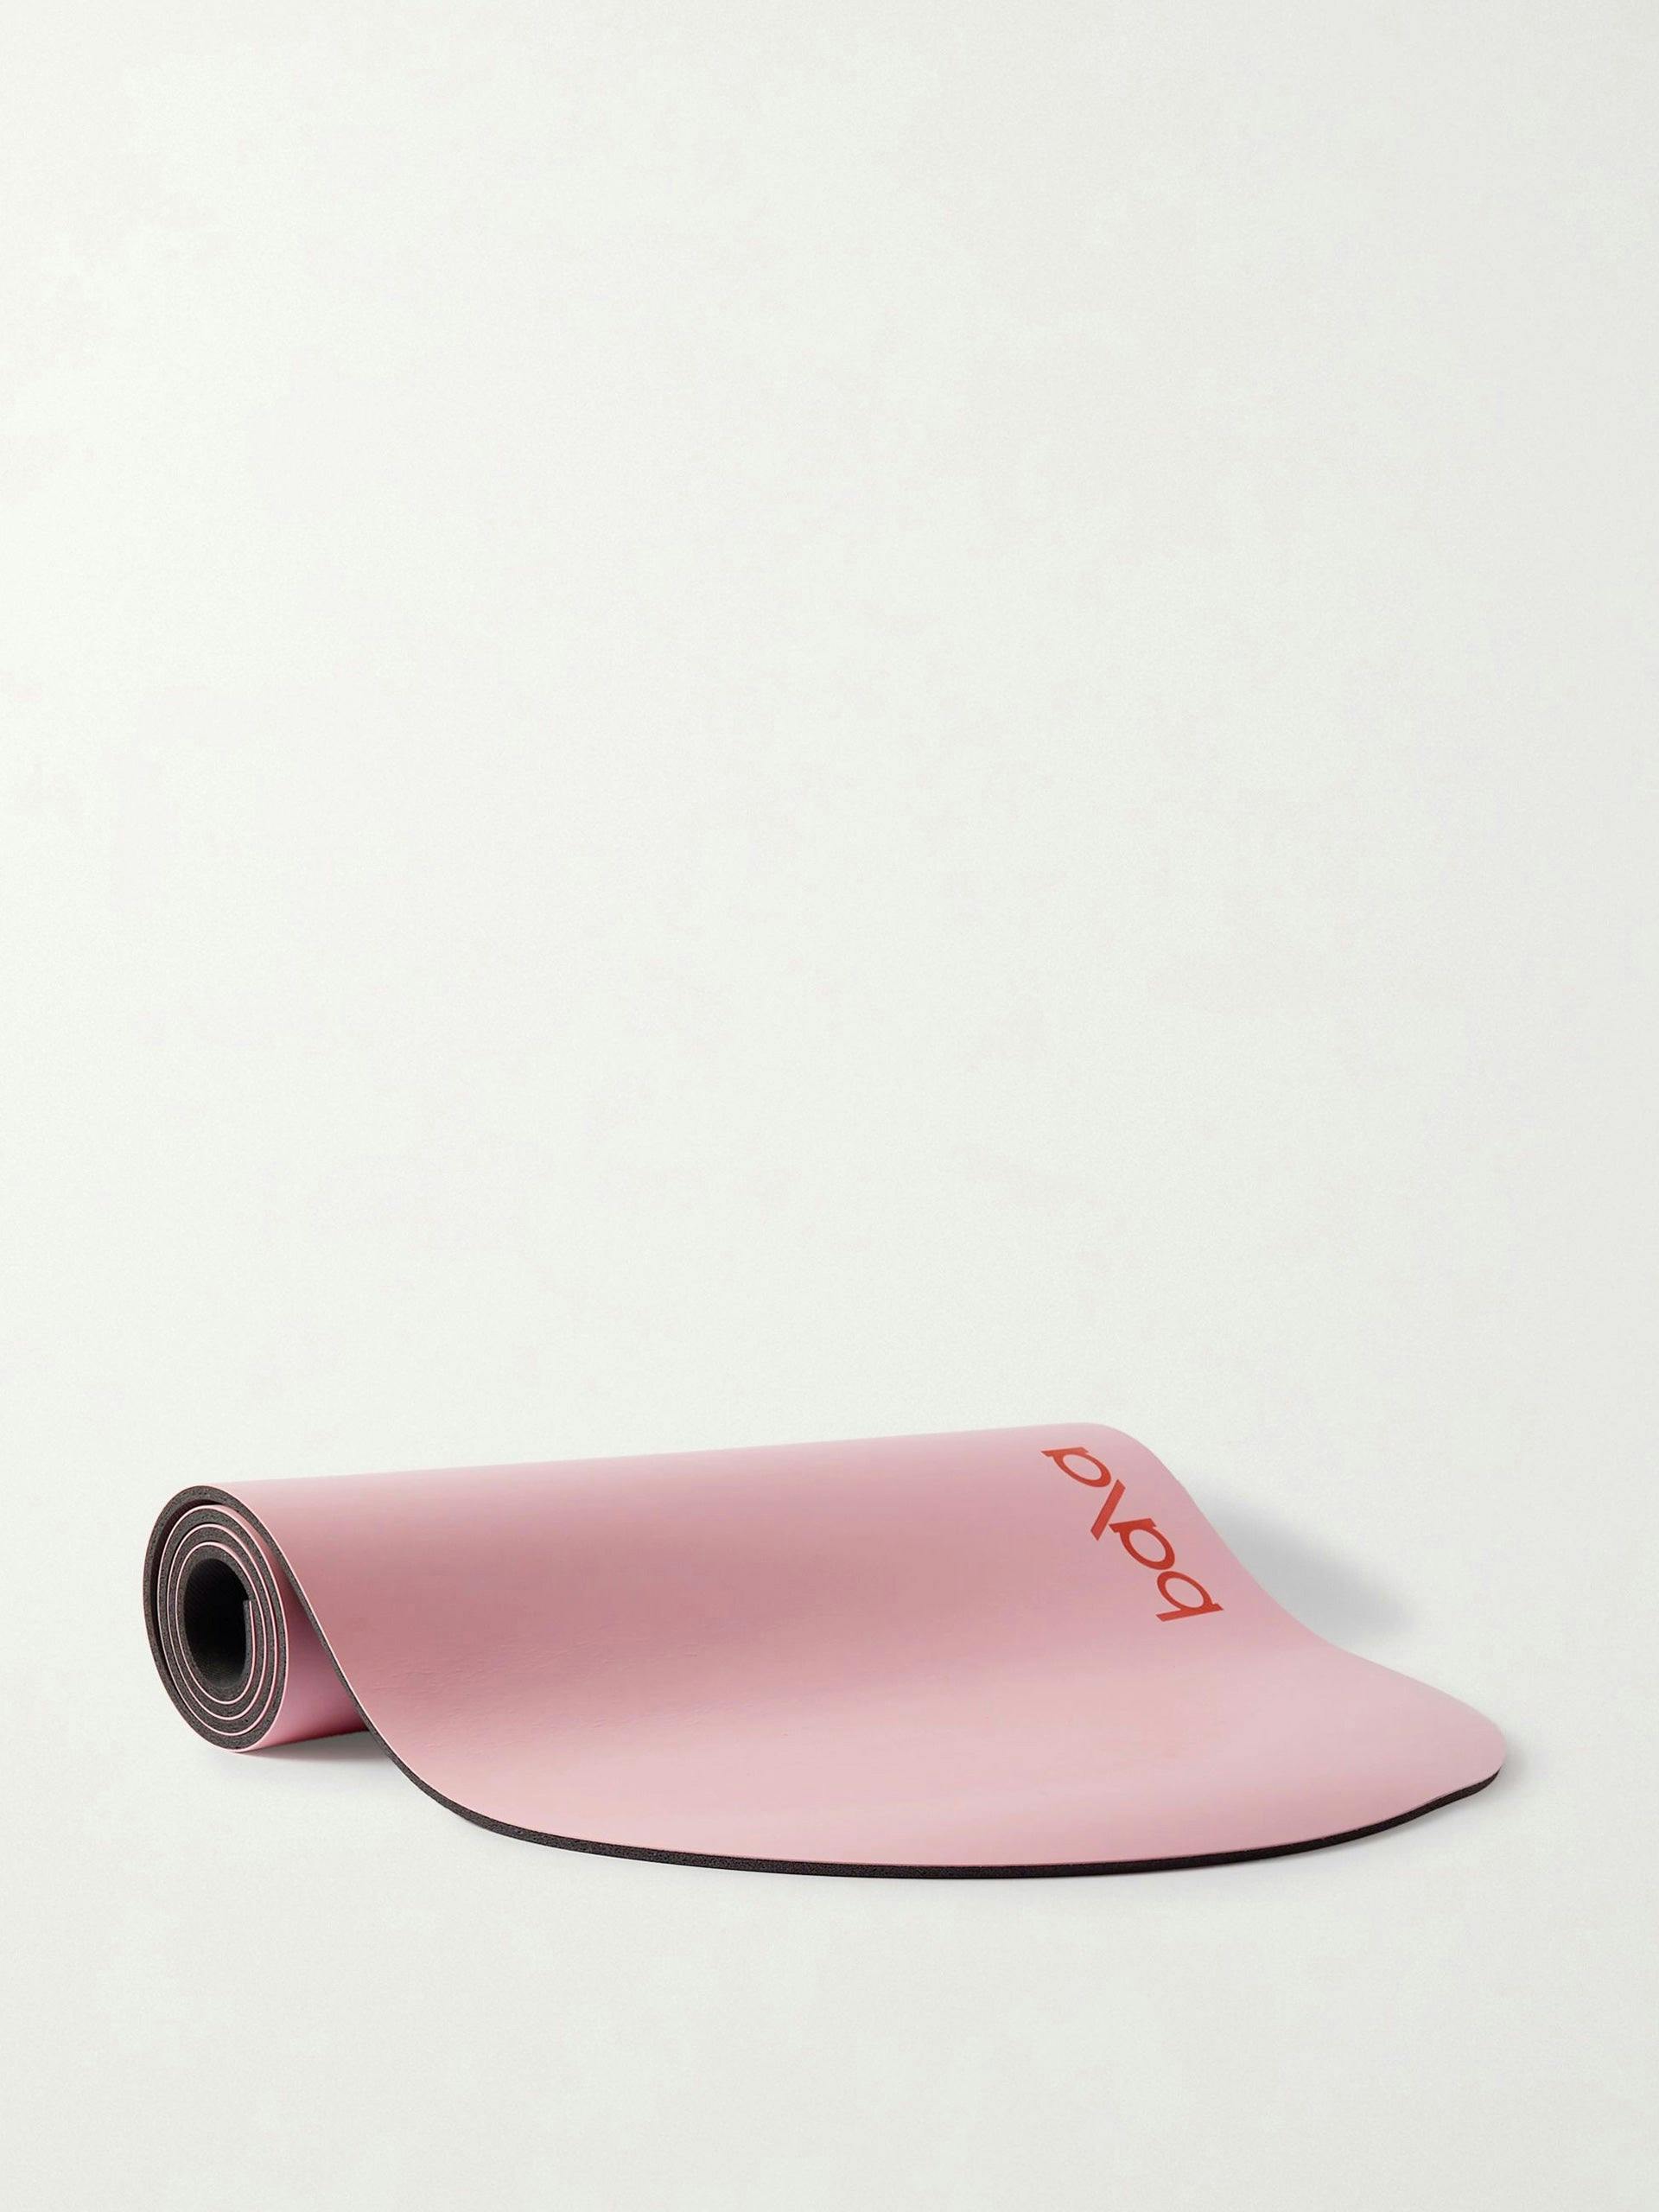 The Play rubber yoga mat